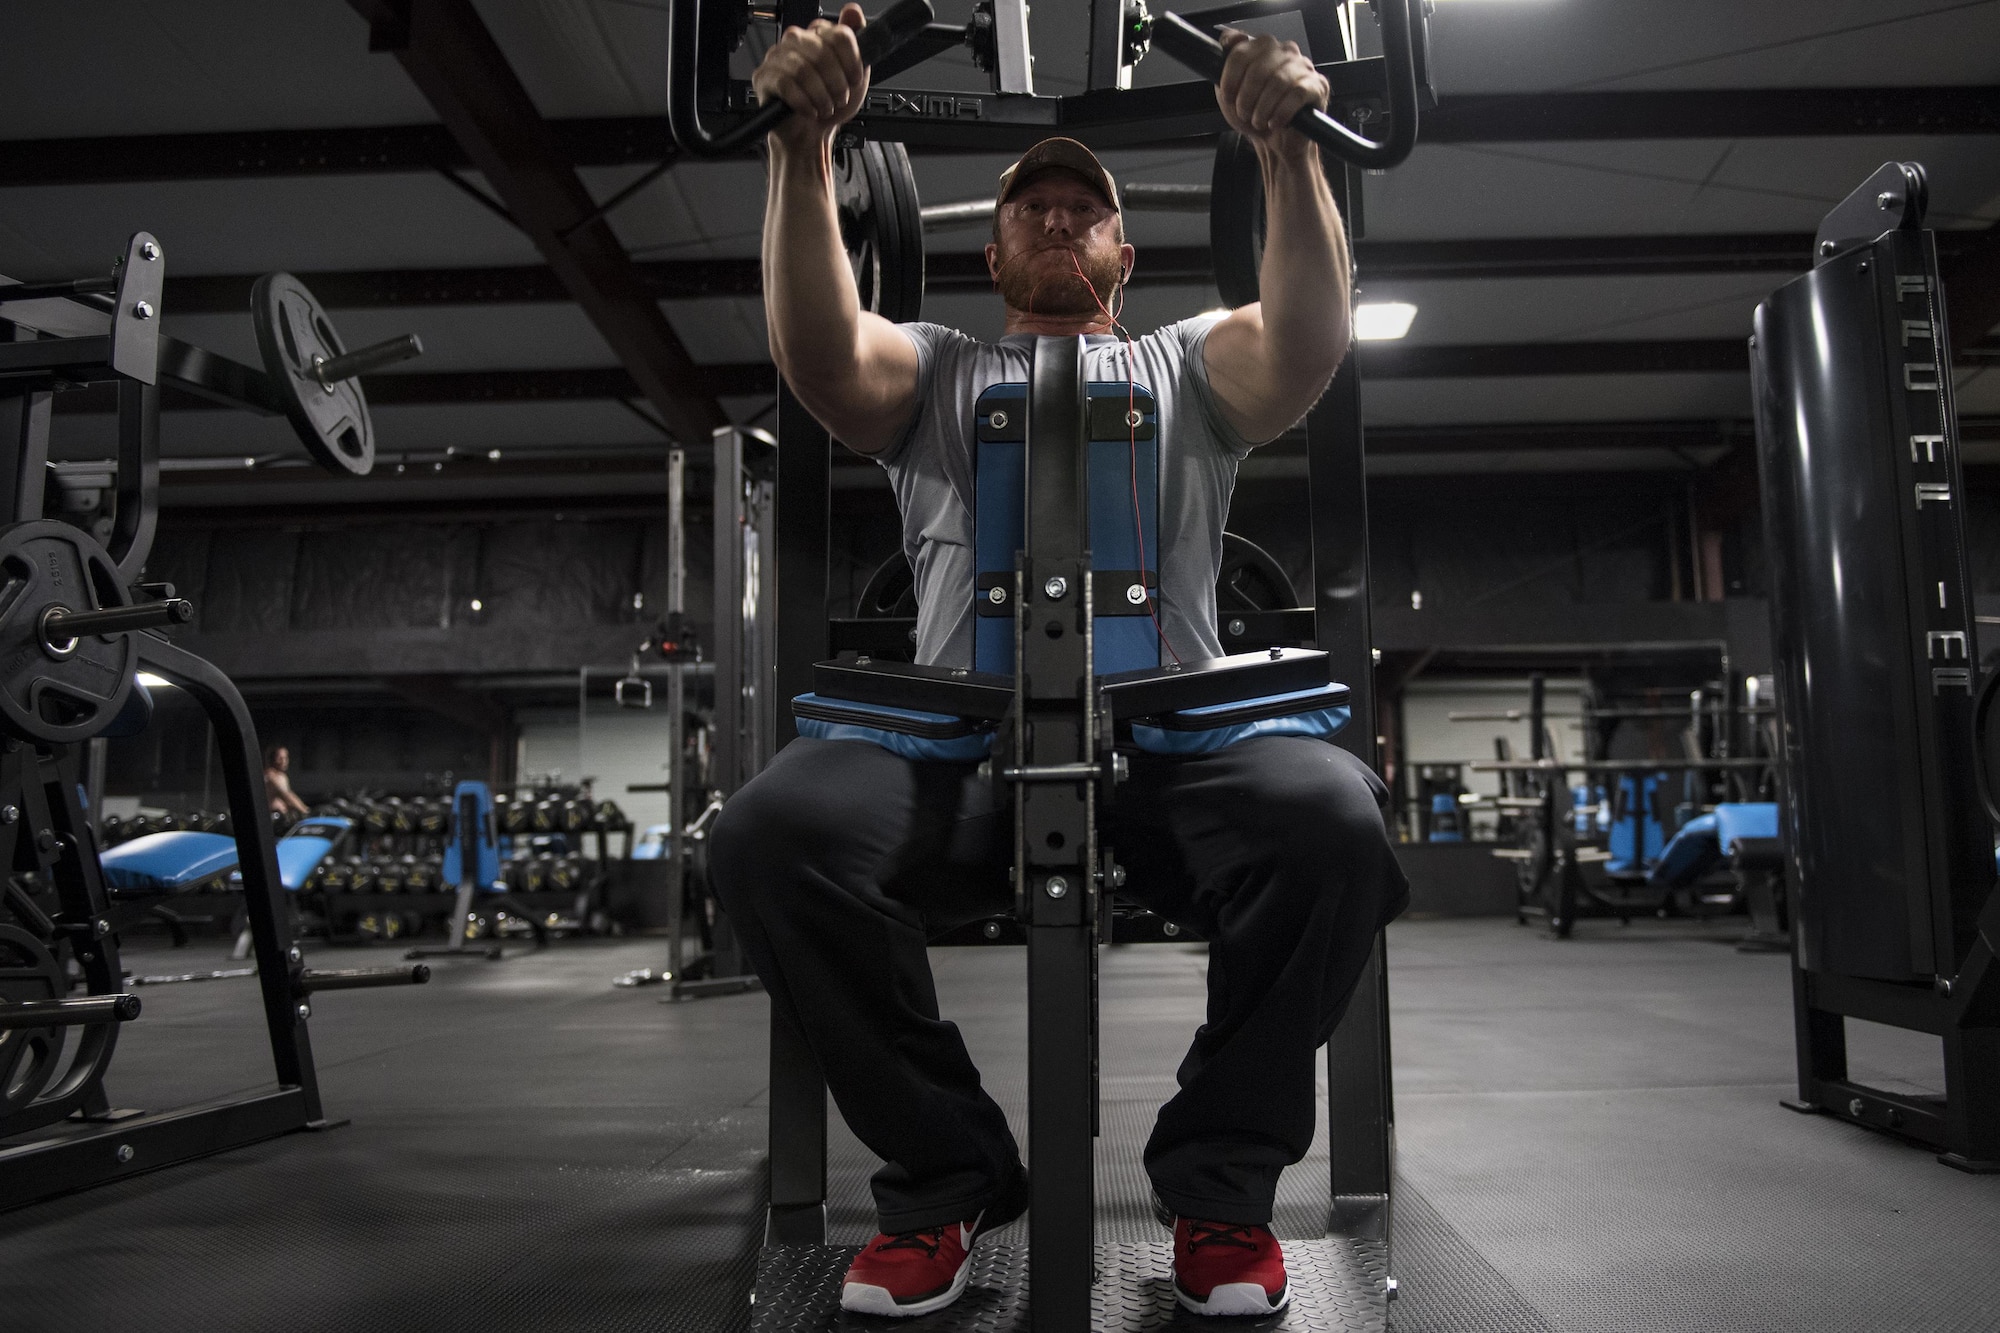 Staff Sgt. Nicholas Worley, 23d Civil Engineer Squadron electrical systems craftsman, works out, April 18, 2017, in Valdosta, Ga. In January 2012 Worley was diagnosed with Chronic Myelogenous Leukemia, an uncommon form of blood-cell cancer that starts in the blood-forming bone marrow cells. He’s currently in remission and goes to the cancer center every three months to ensure his treatment is still working. 
“The gym plays a major part in my remission status because I can see my body progressing and getting stronger and I know I’m not feeling sick,” said Worley. (U.S. Air Force Photo by Senior Airman Janiqua P. Robinson)
